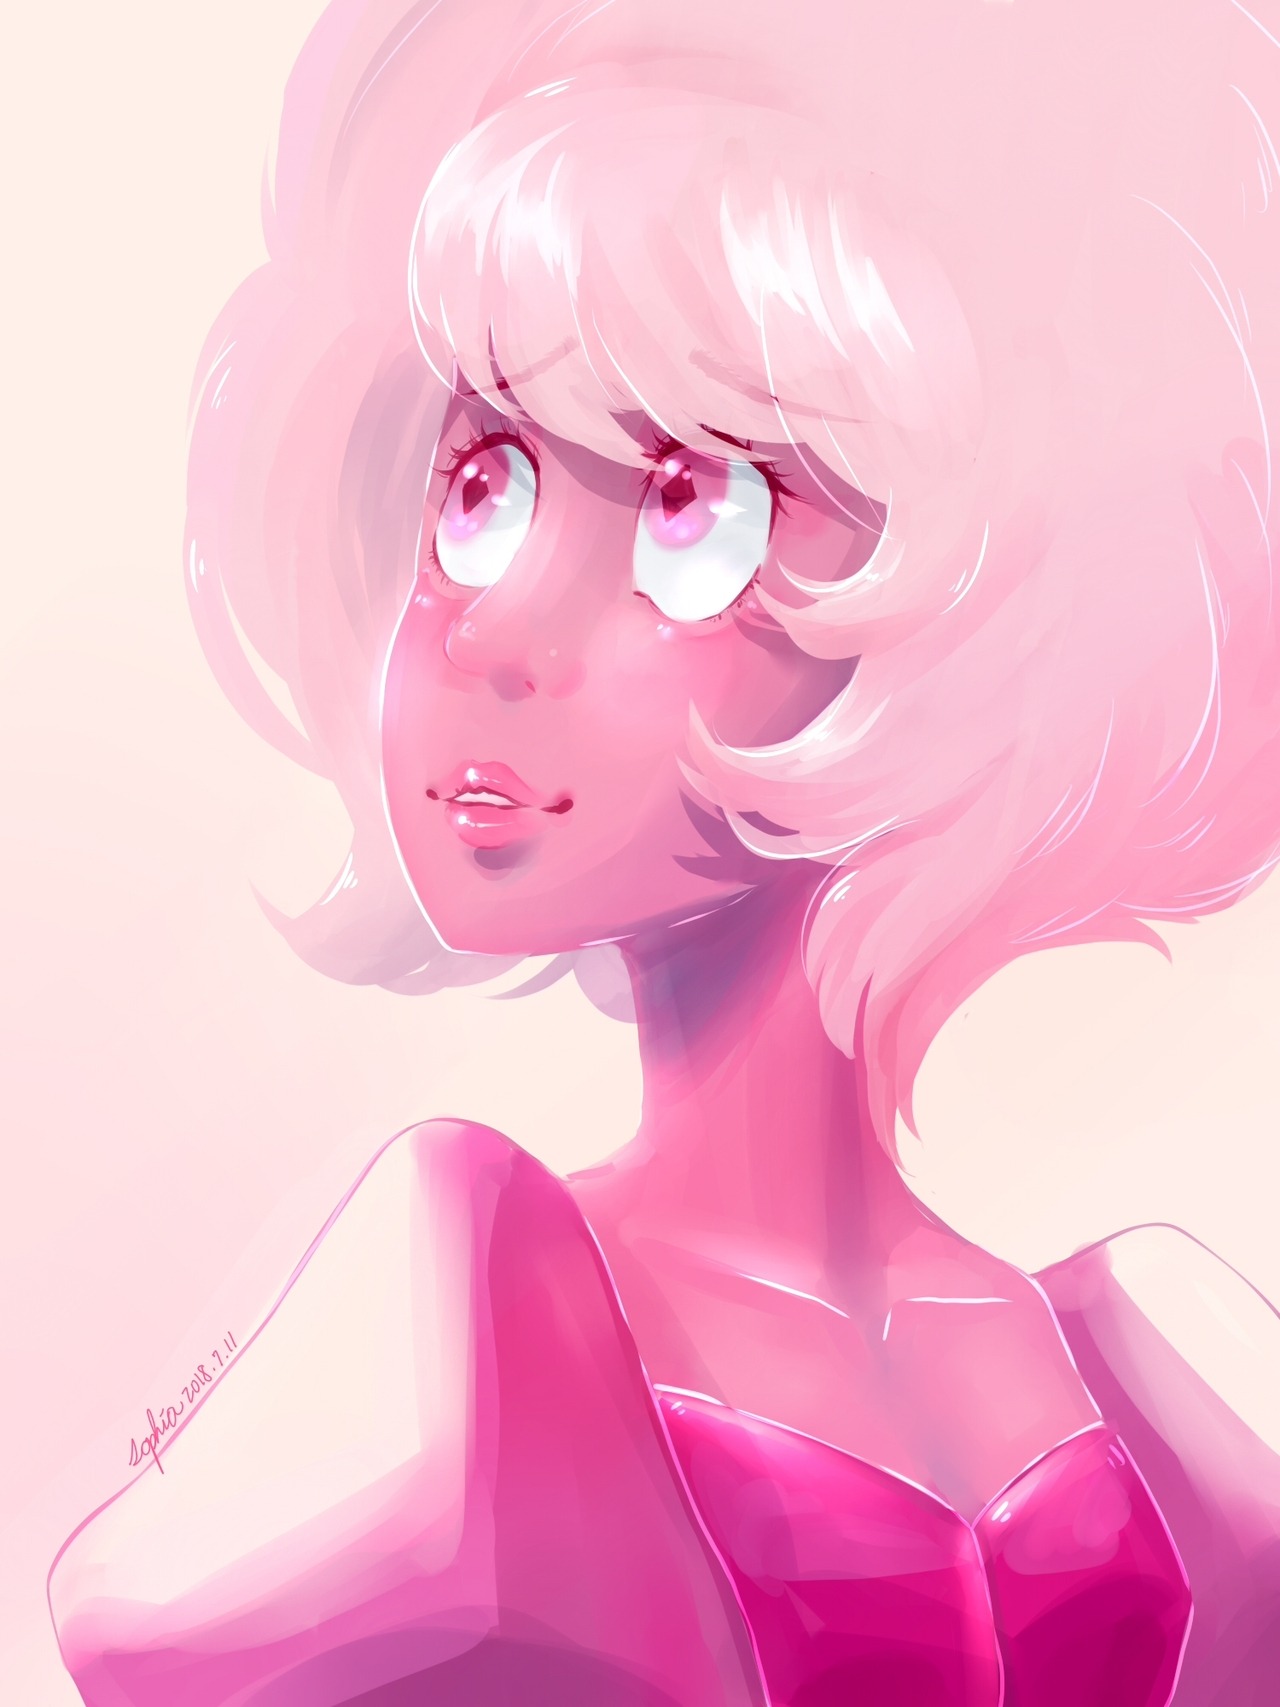 Some Pink. I love those eyes,full with hope.